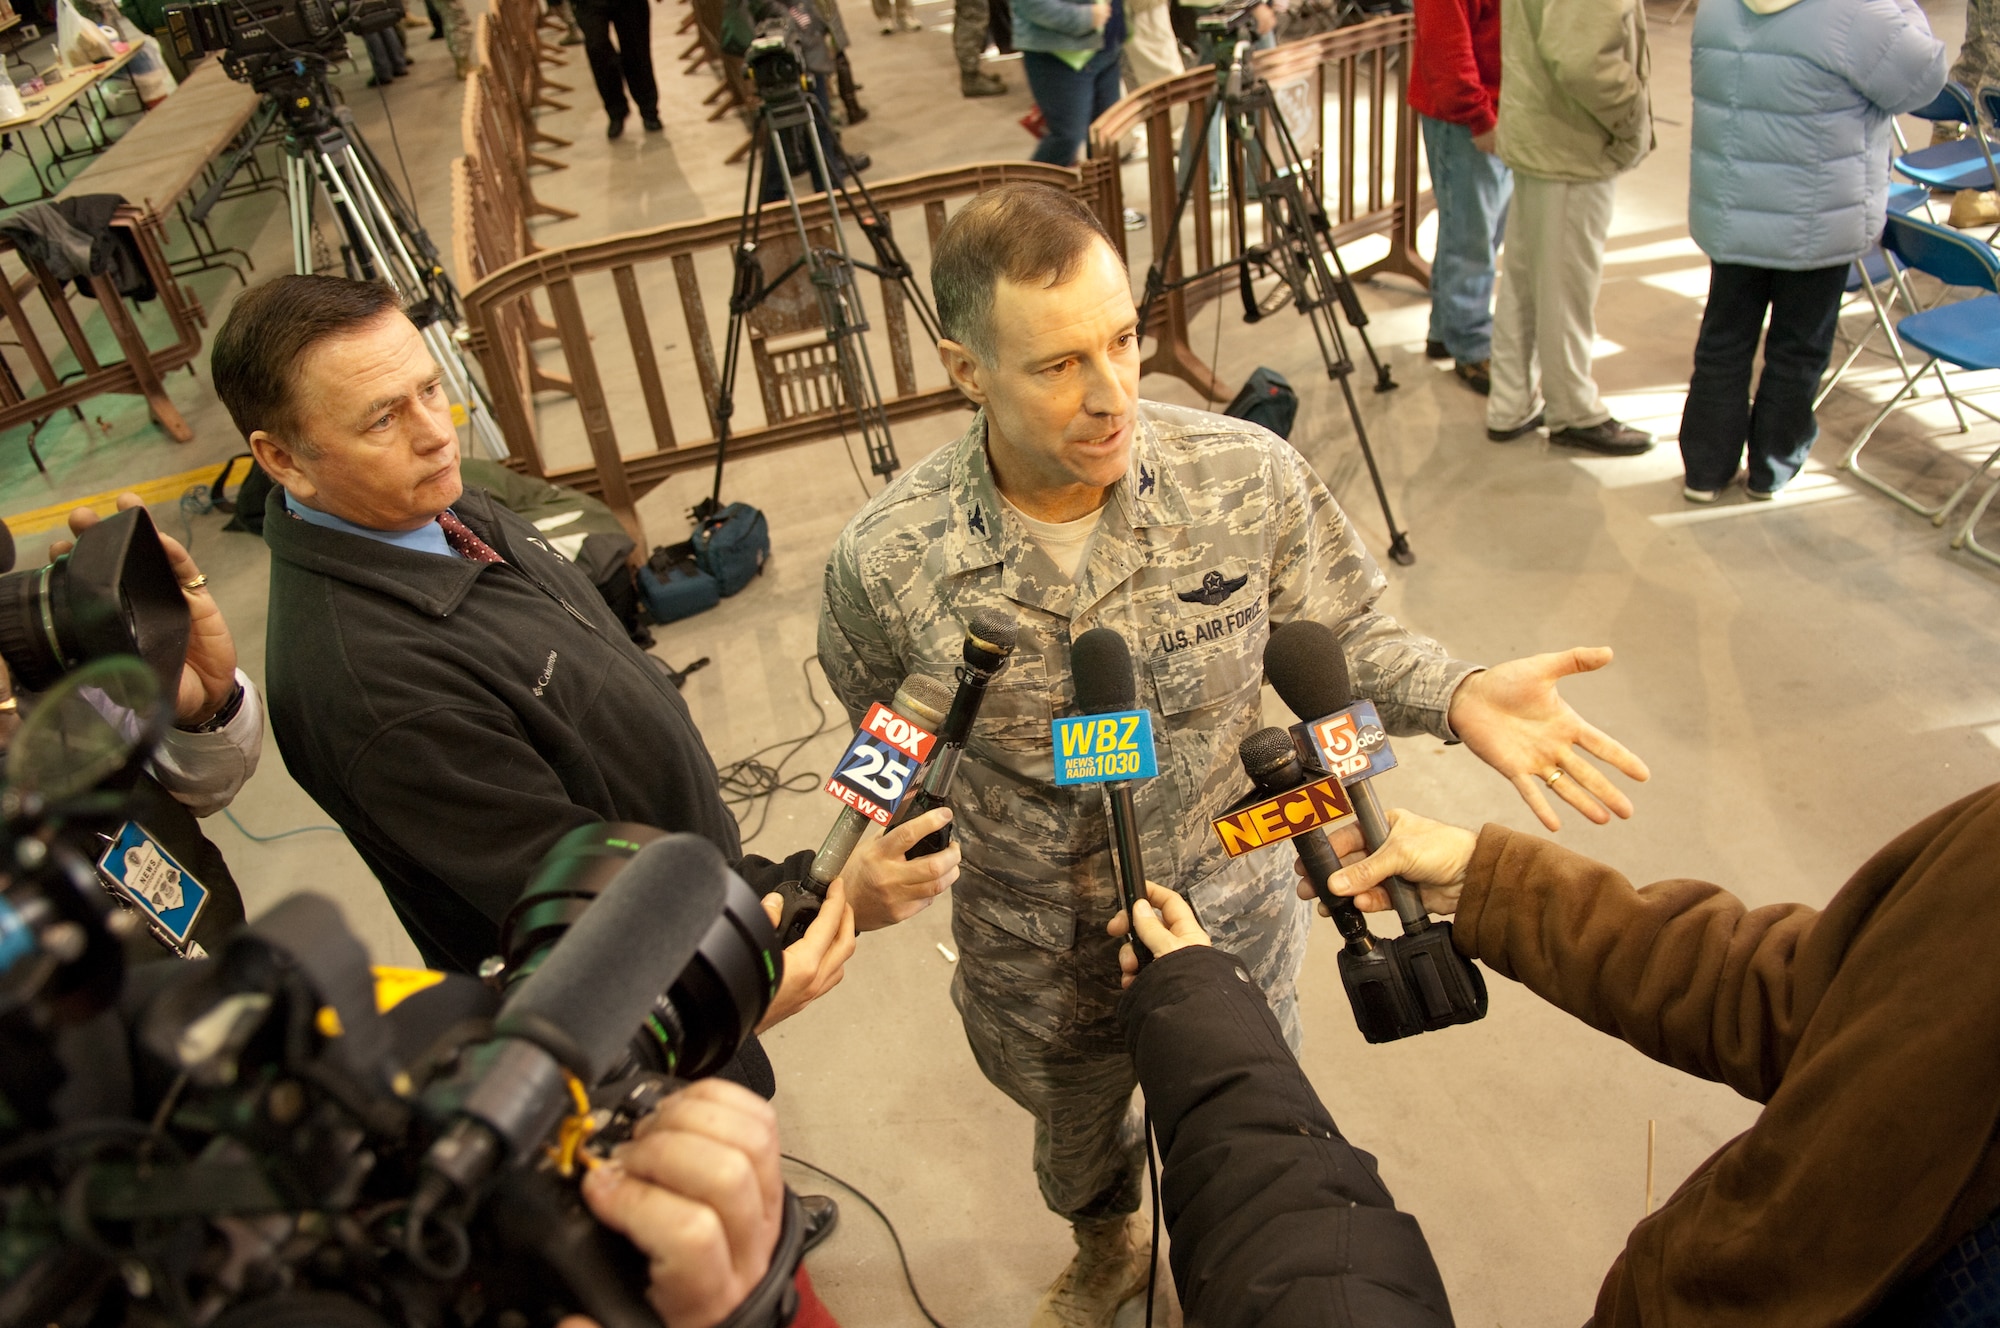 HANSCOM AIR FORCE BASE, Mass. - Col. Dave Orr, 66th Air Base Wing commander, addresses members of the local Boston and regional media Dec. 11 about the importance of honoring Airmen returning from deployments and their families. Hanscom hosted a Heroes Homecoming event where the base and local community welcomed nearly 30 Airmen back from their deployments. The event hosted guests from the Hanscom, local and Boston communities, including Air Force Materiel Command and Hanscom senior leadership, New England Patriots hall of famer John Hannah and other distinguished guests at the Hanscom Aero Club. (U.S. Air Force Photo by Rick Berry)